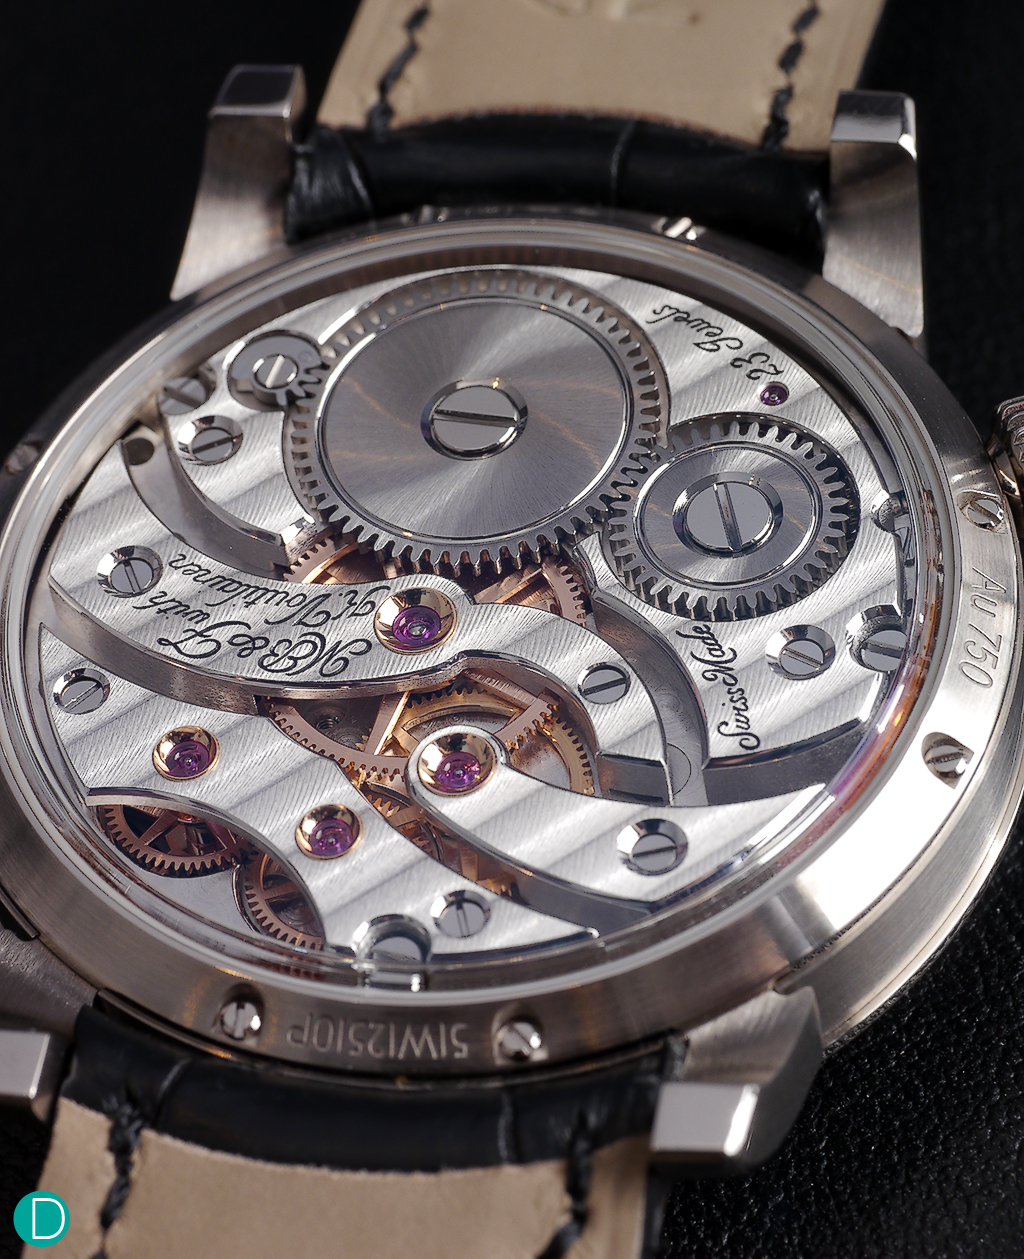 The movement is quite classical in design. With a typical Lepine style layout common in the turn of the last century.  This classical looking movement is quite beautifully finished.